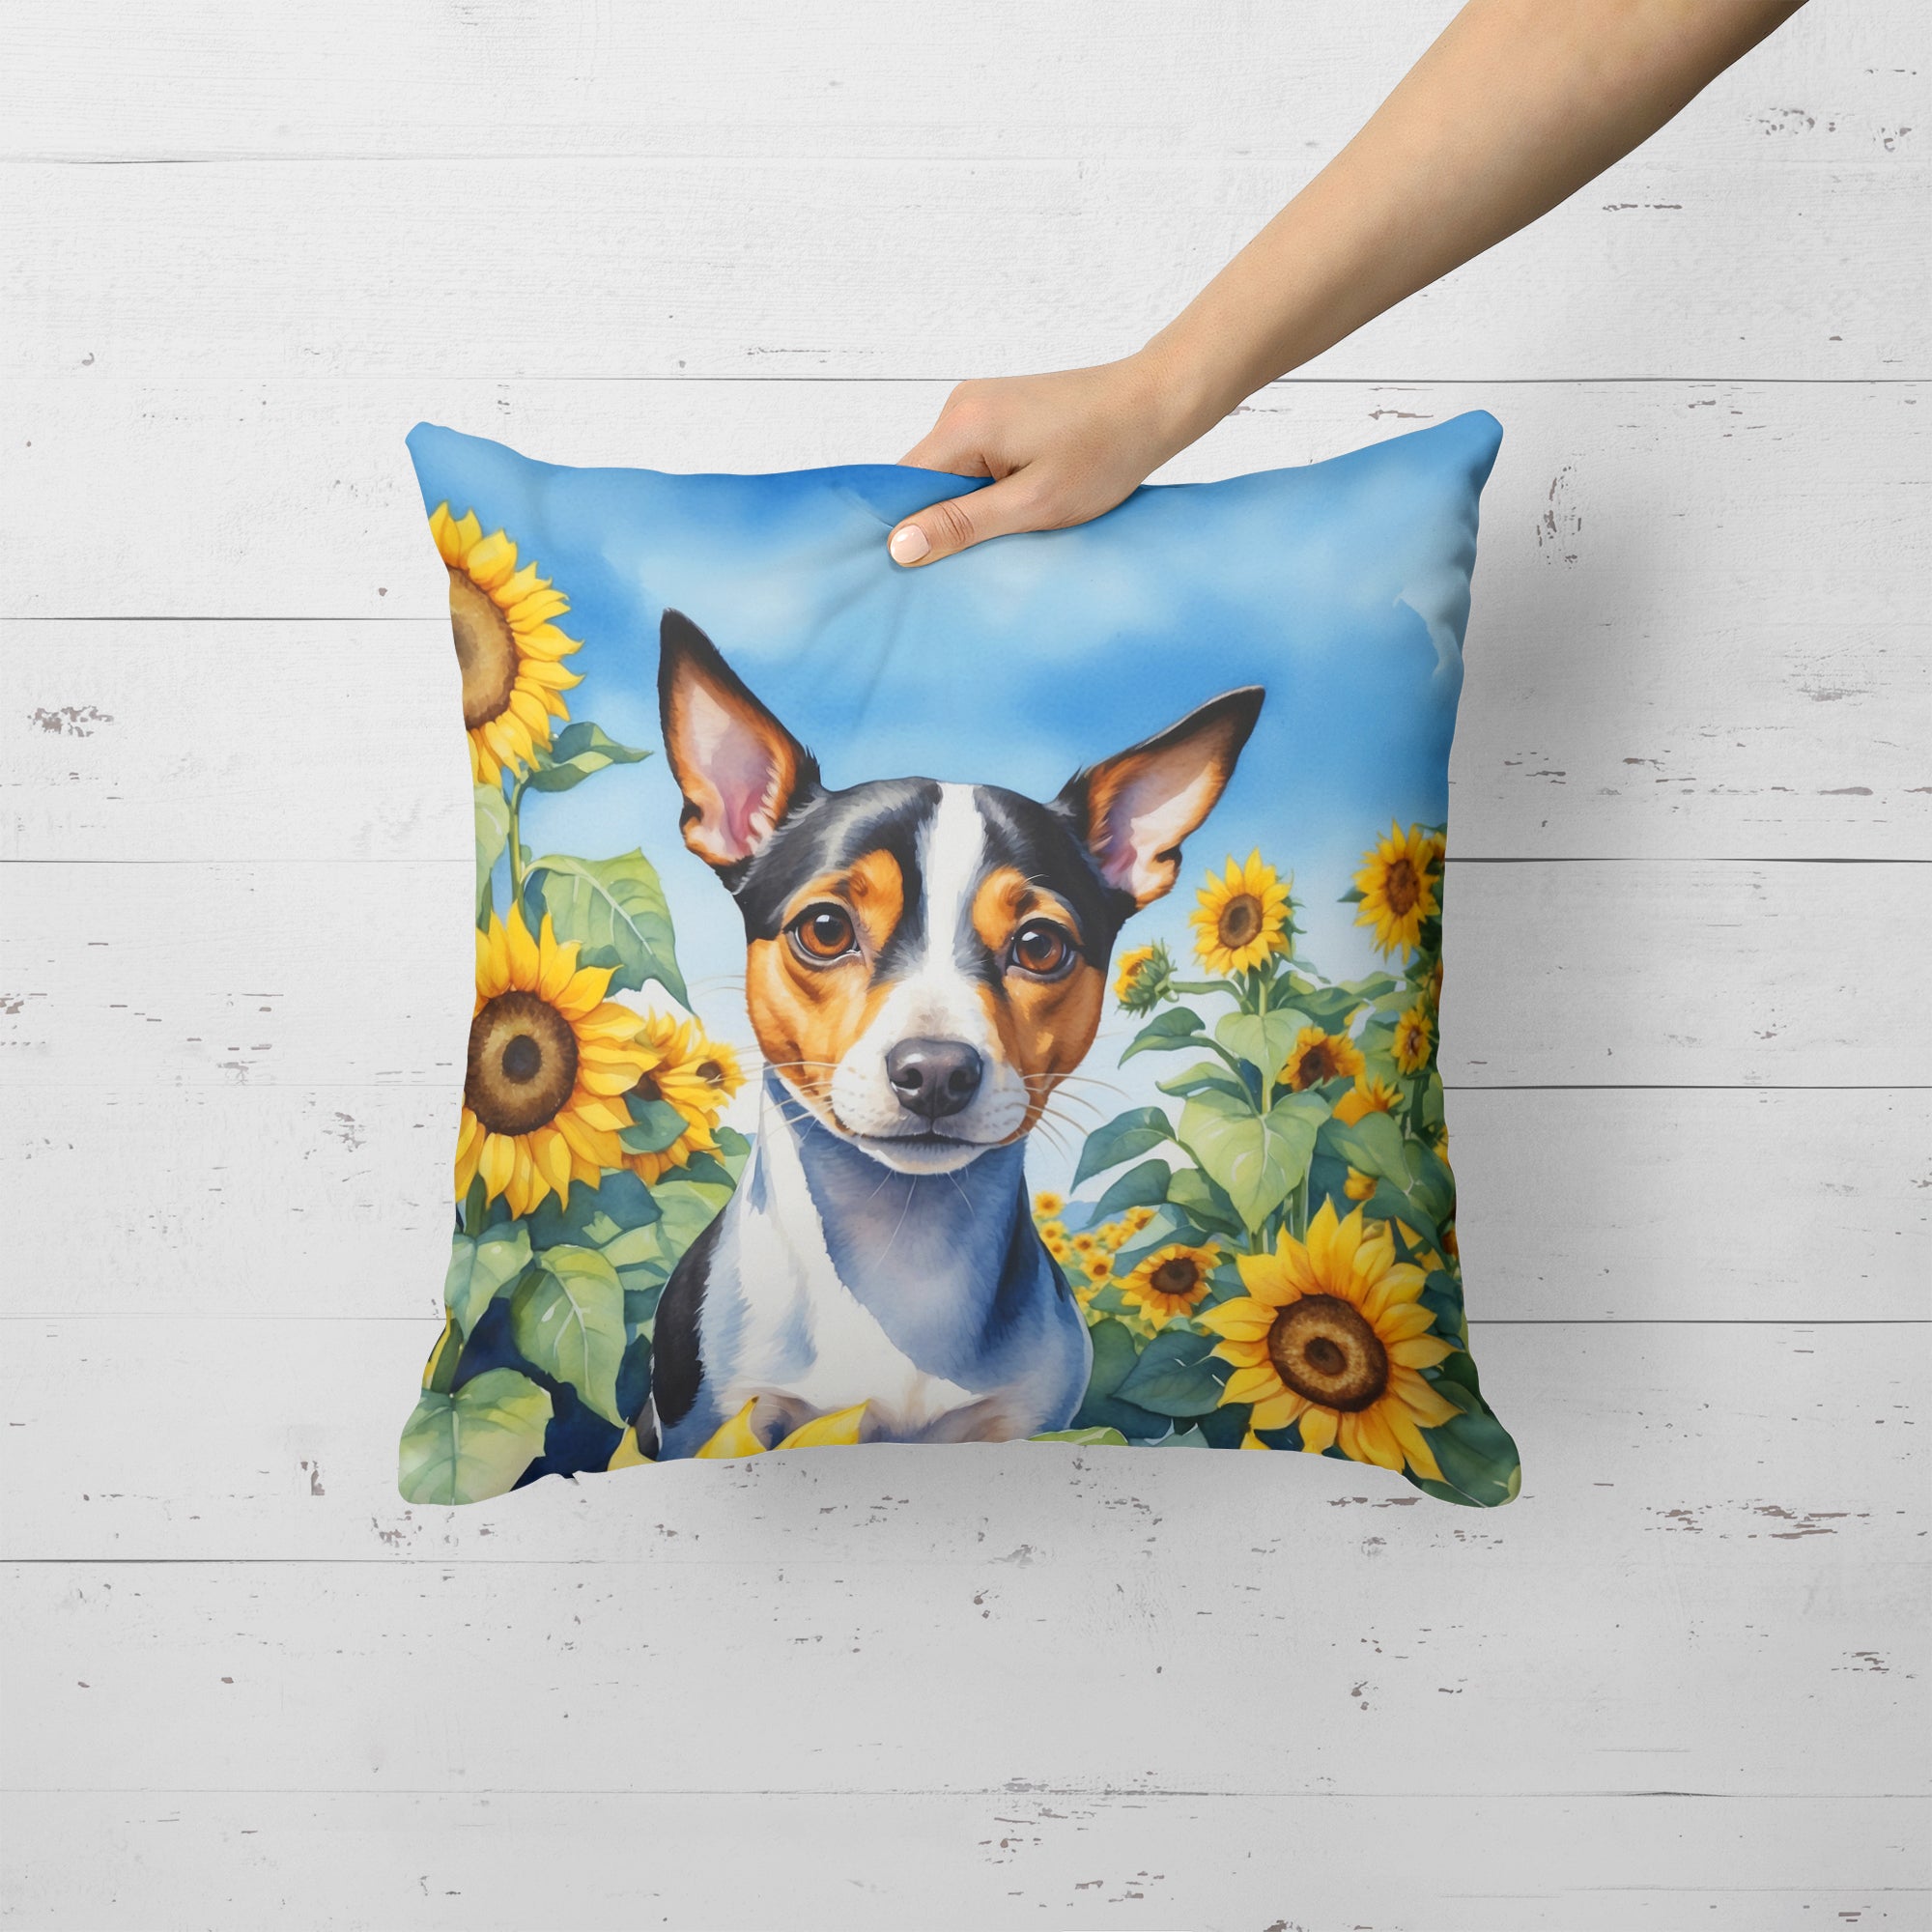 Buy this Rat Terrier in Sunflowers Throw Pillow